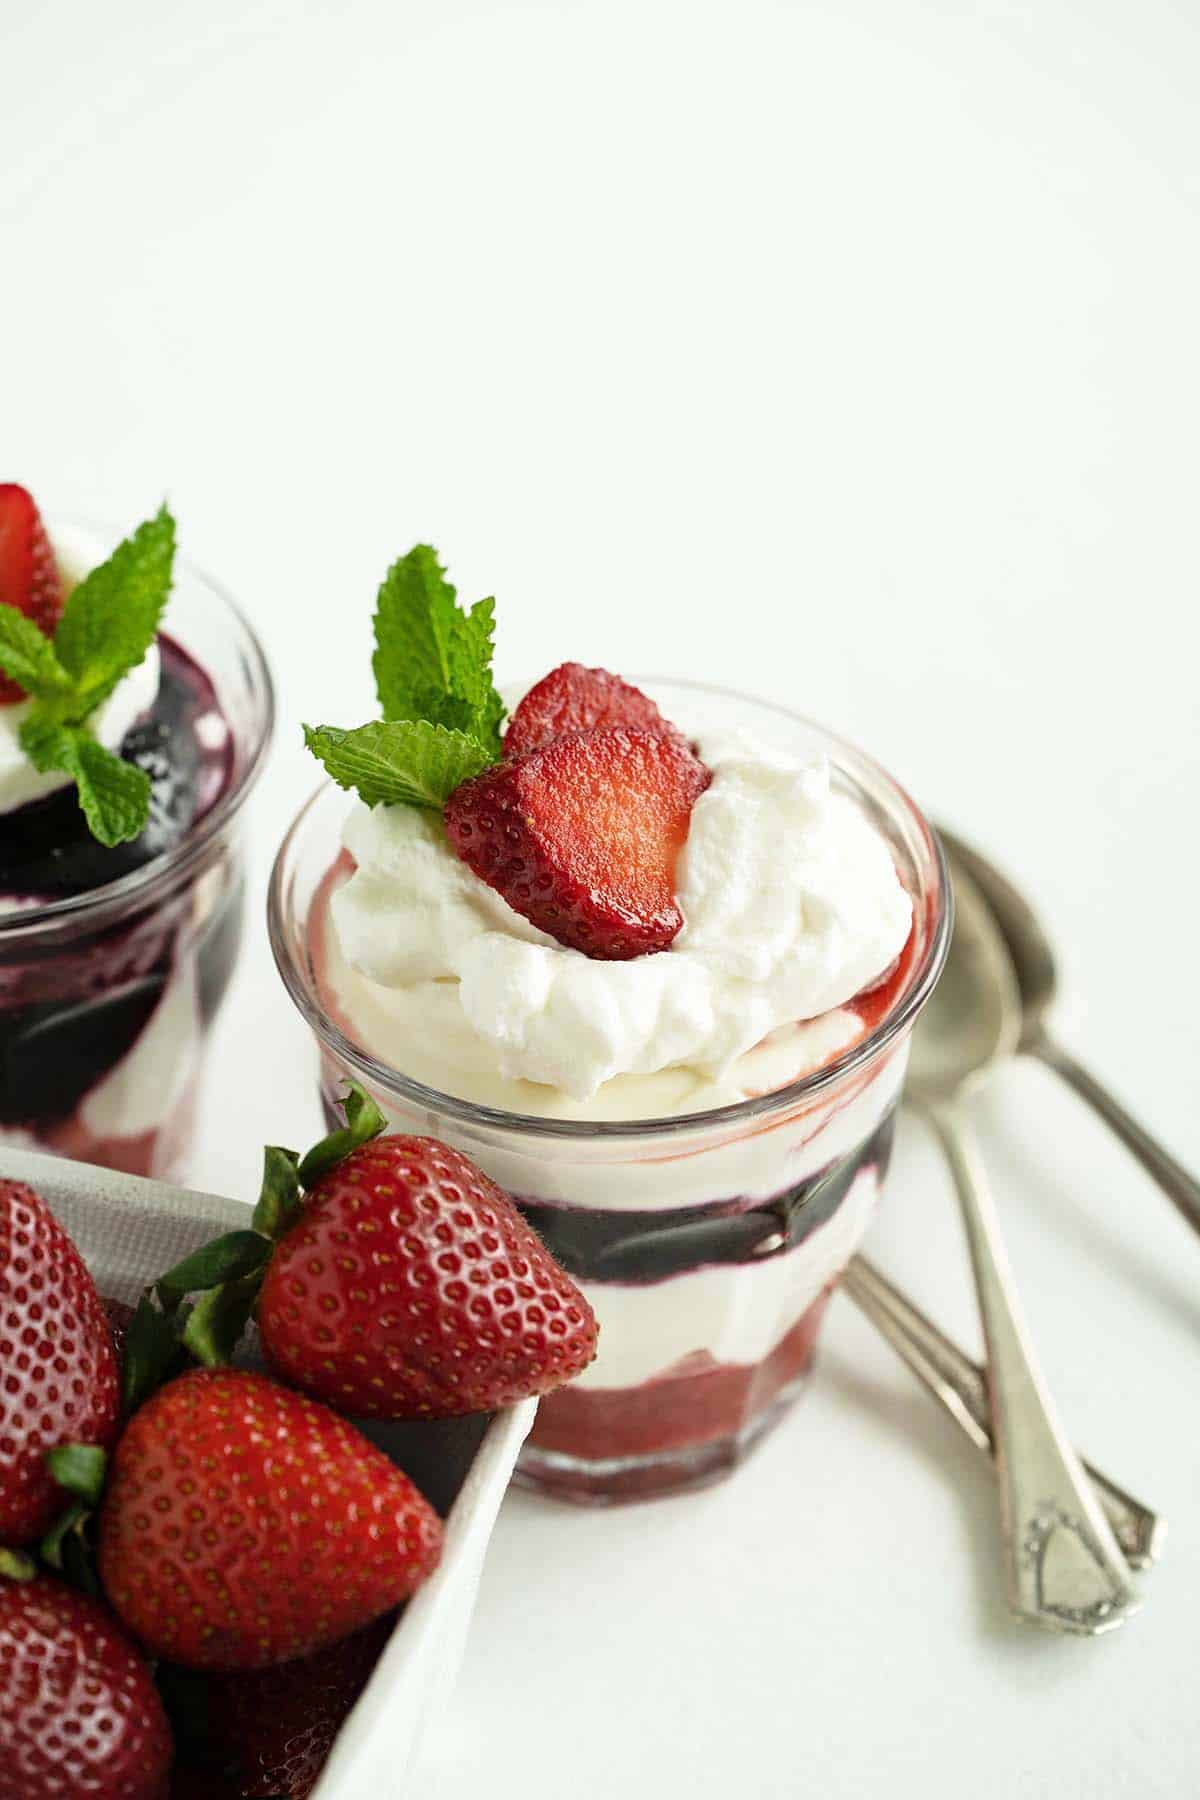 summer berry parfaits with fresh strawberries